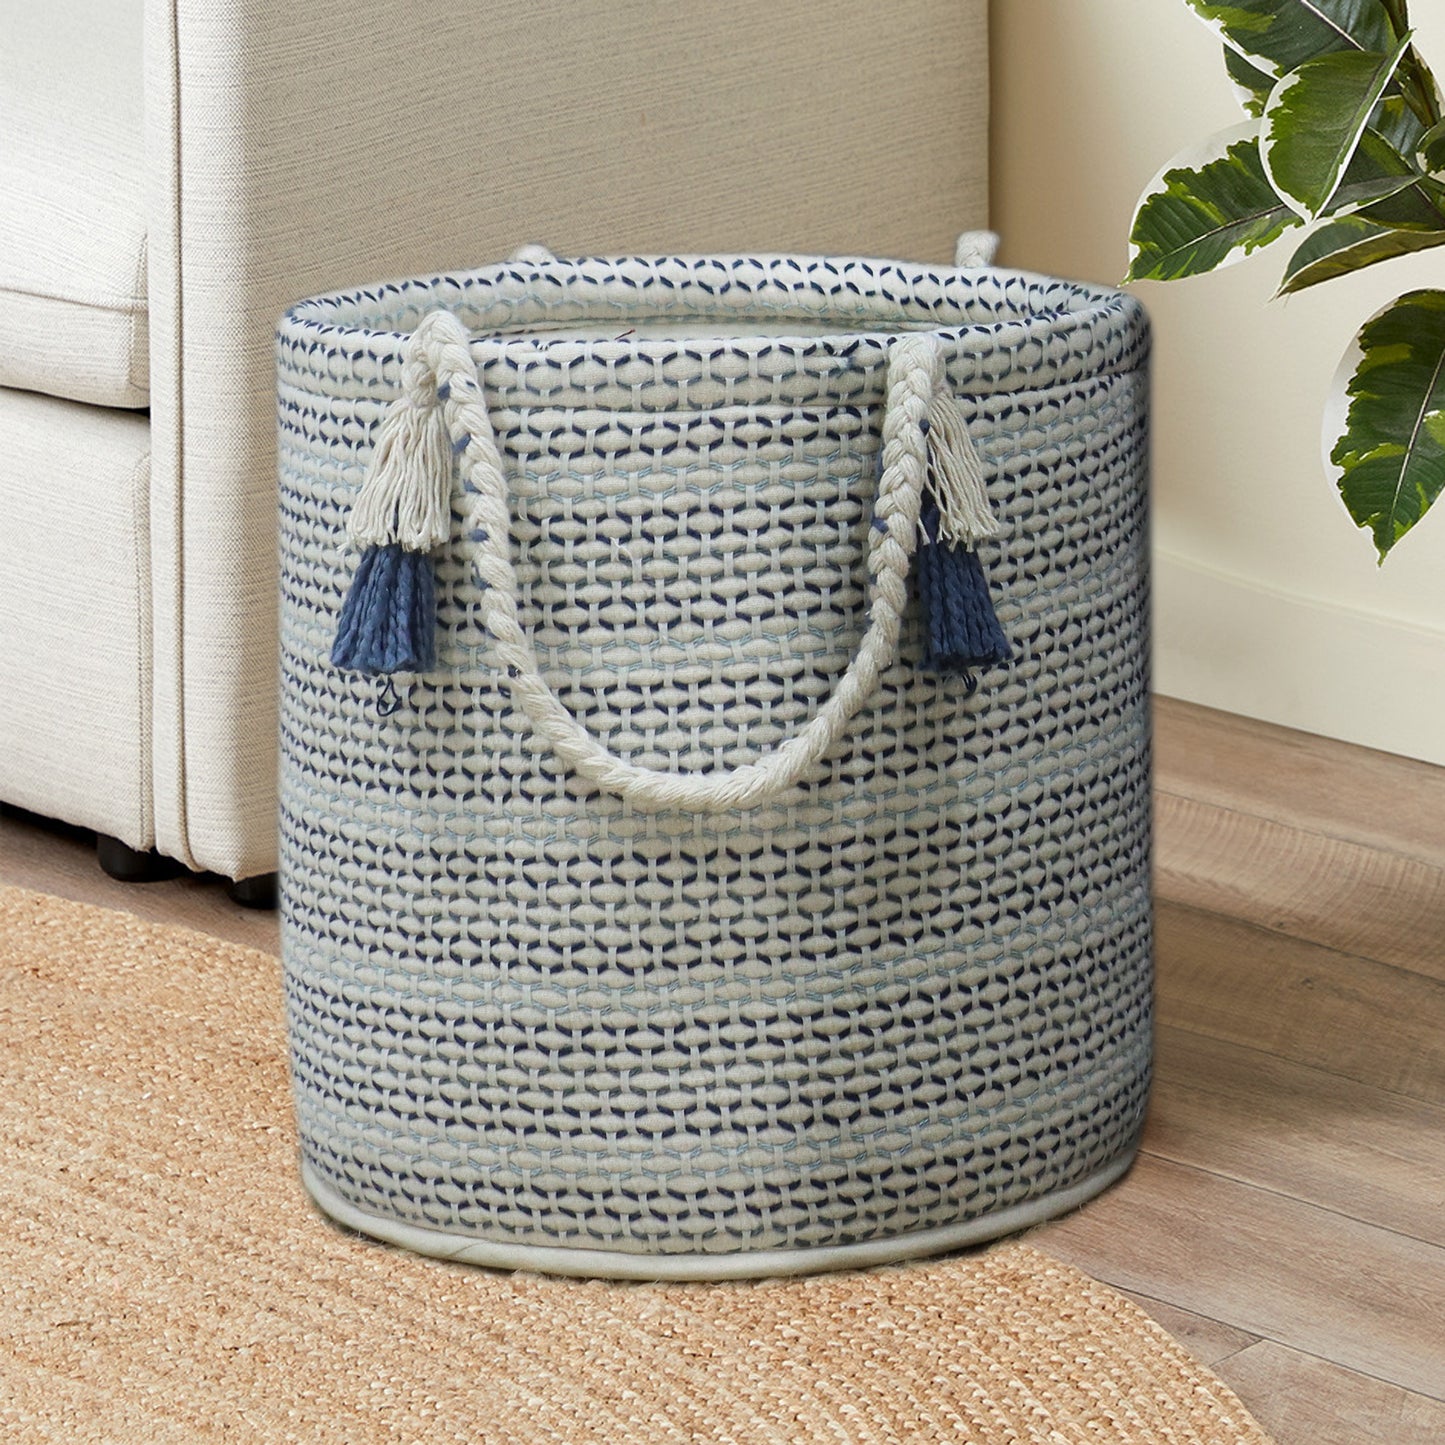 Blue and White Cotton Woven Basket